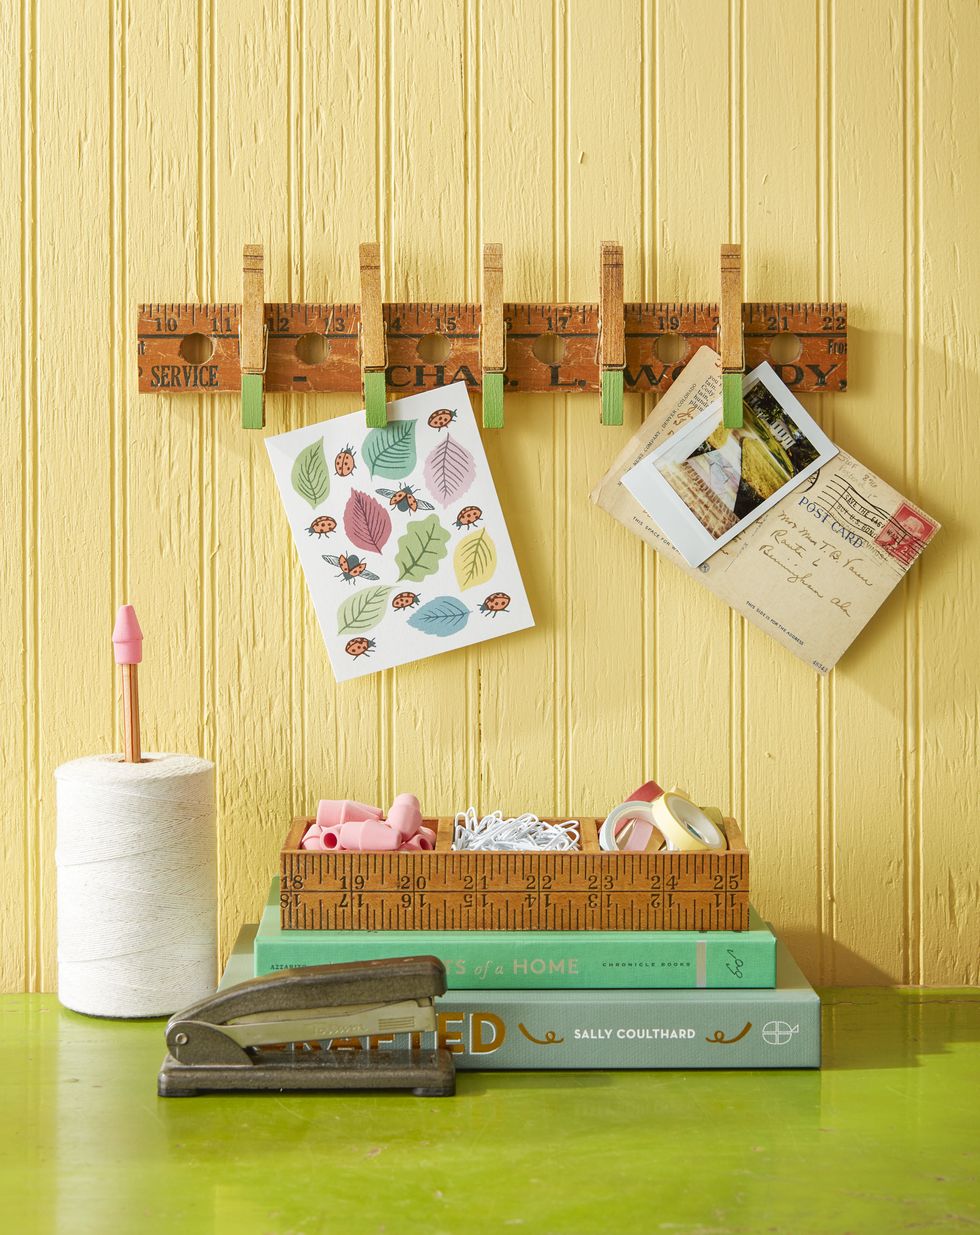 20 Awesome Crafts for Teenagers - The Kitchen Table Classroom